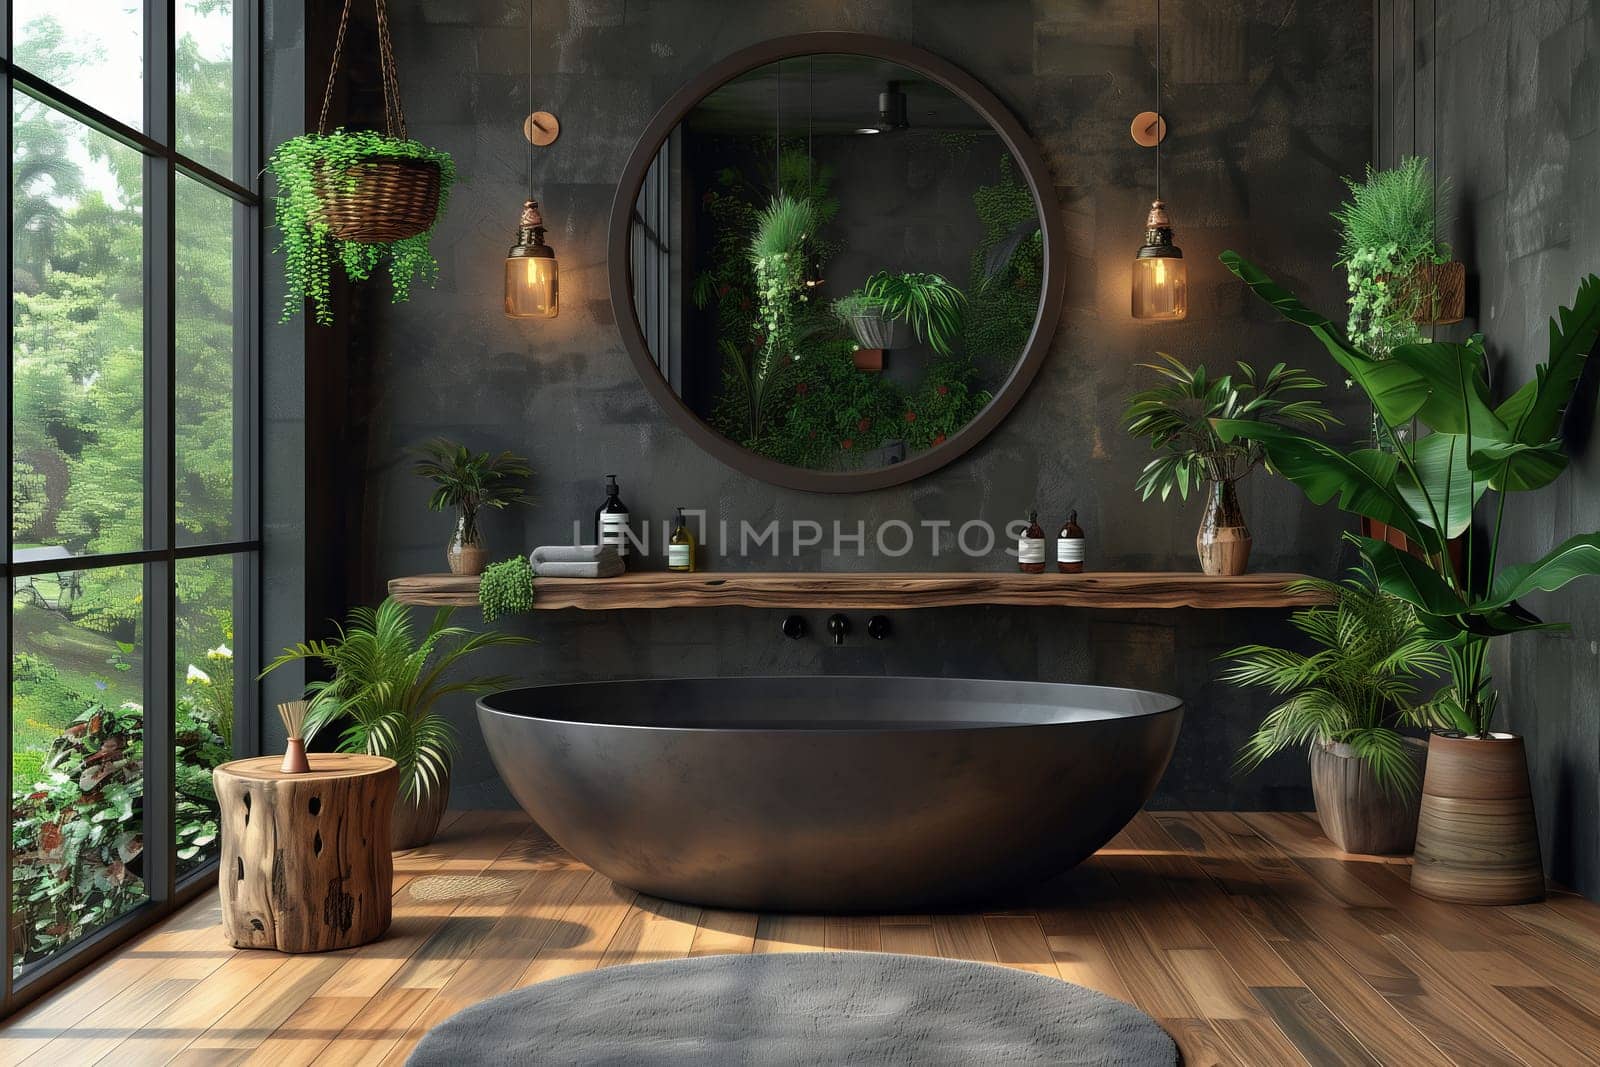 A bathroom with a bathtub, sink, mirror, and houseplants in flowerpots. The interior design features hardwood fixtures and a cozy feel